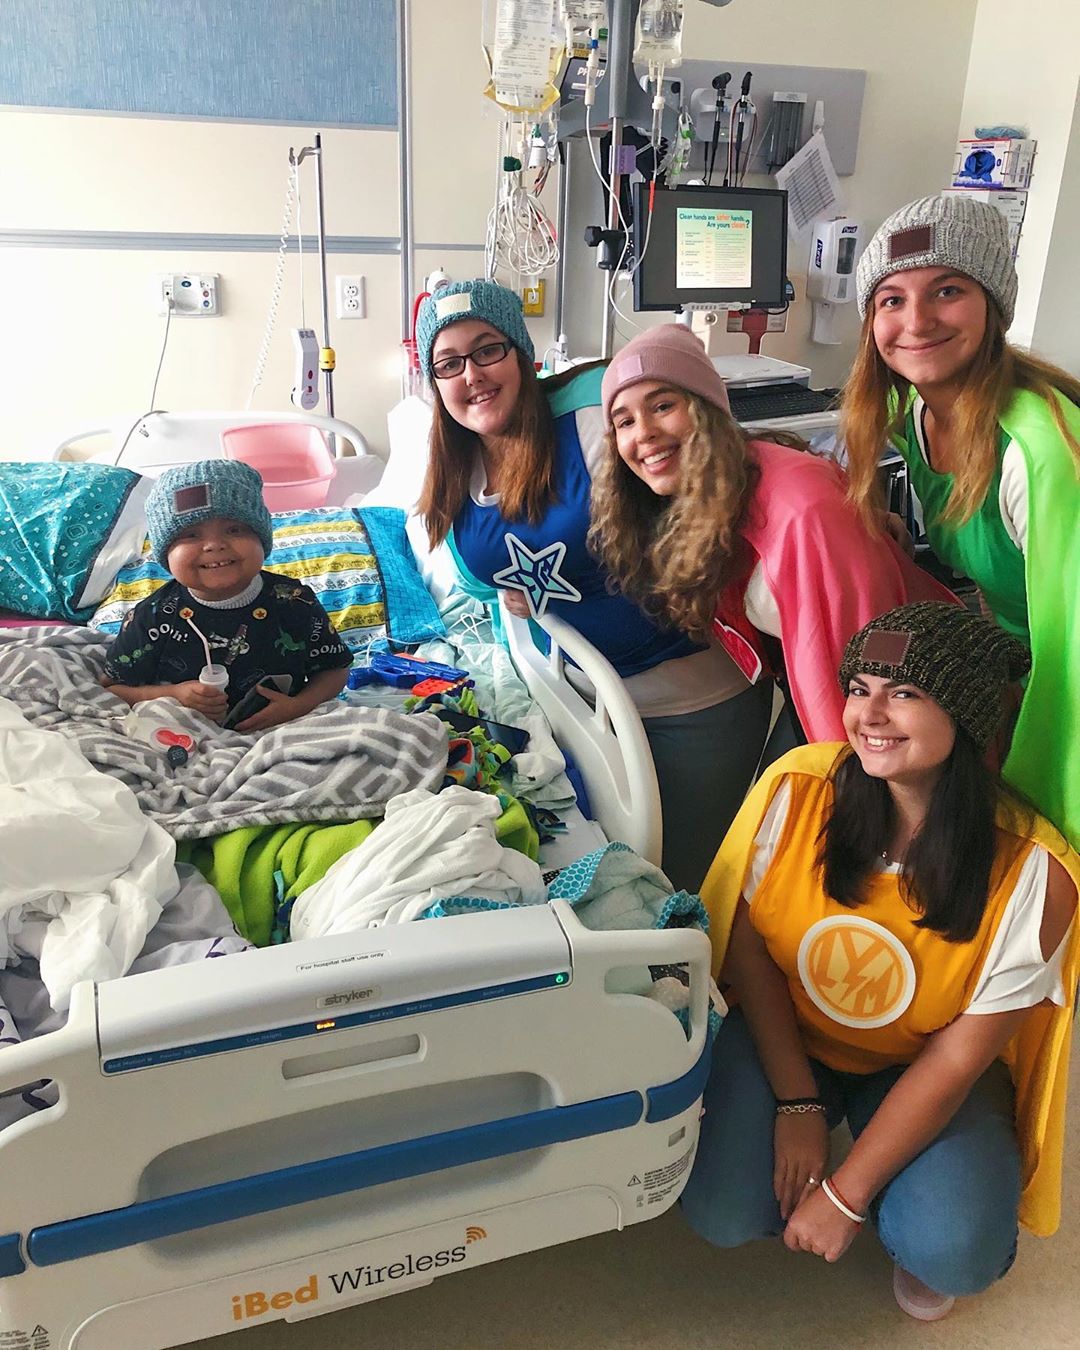 Girls visiting little boy in hospital. Photo by Instagram user @loveyourmelon